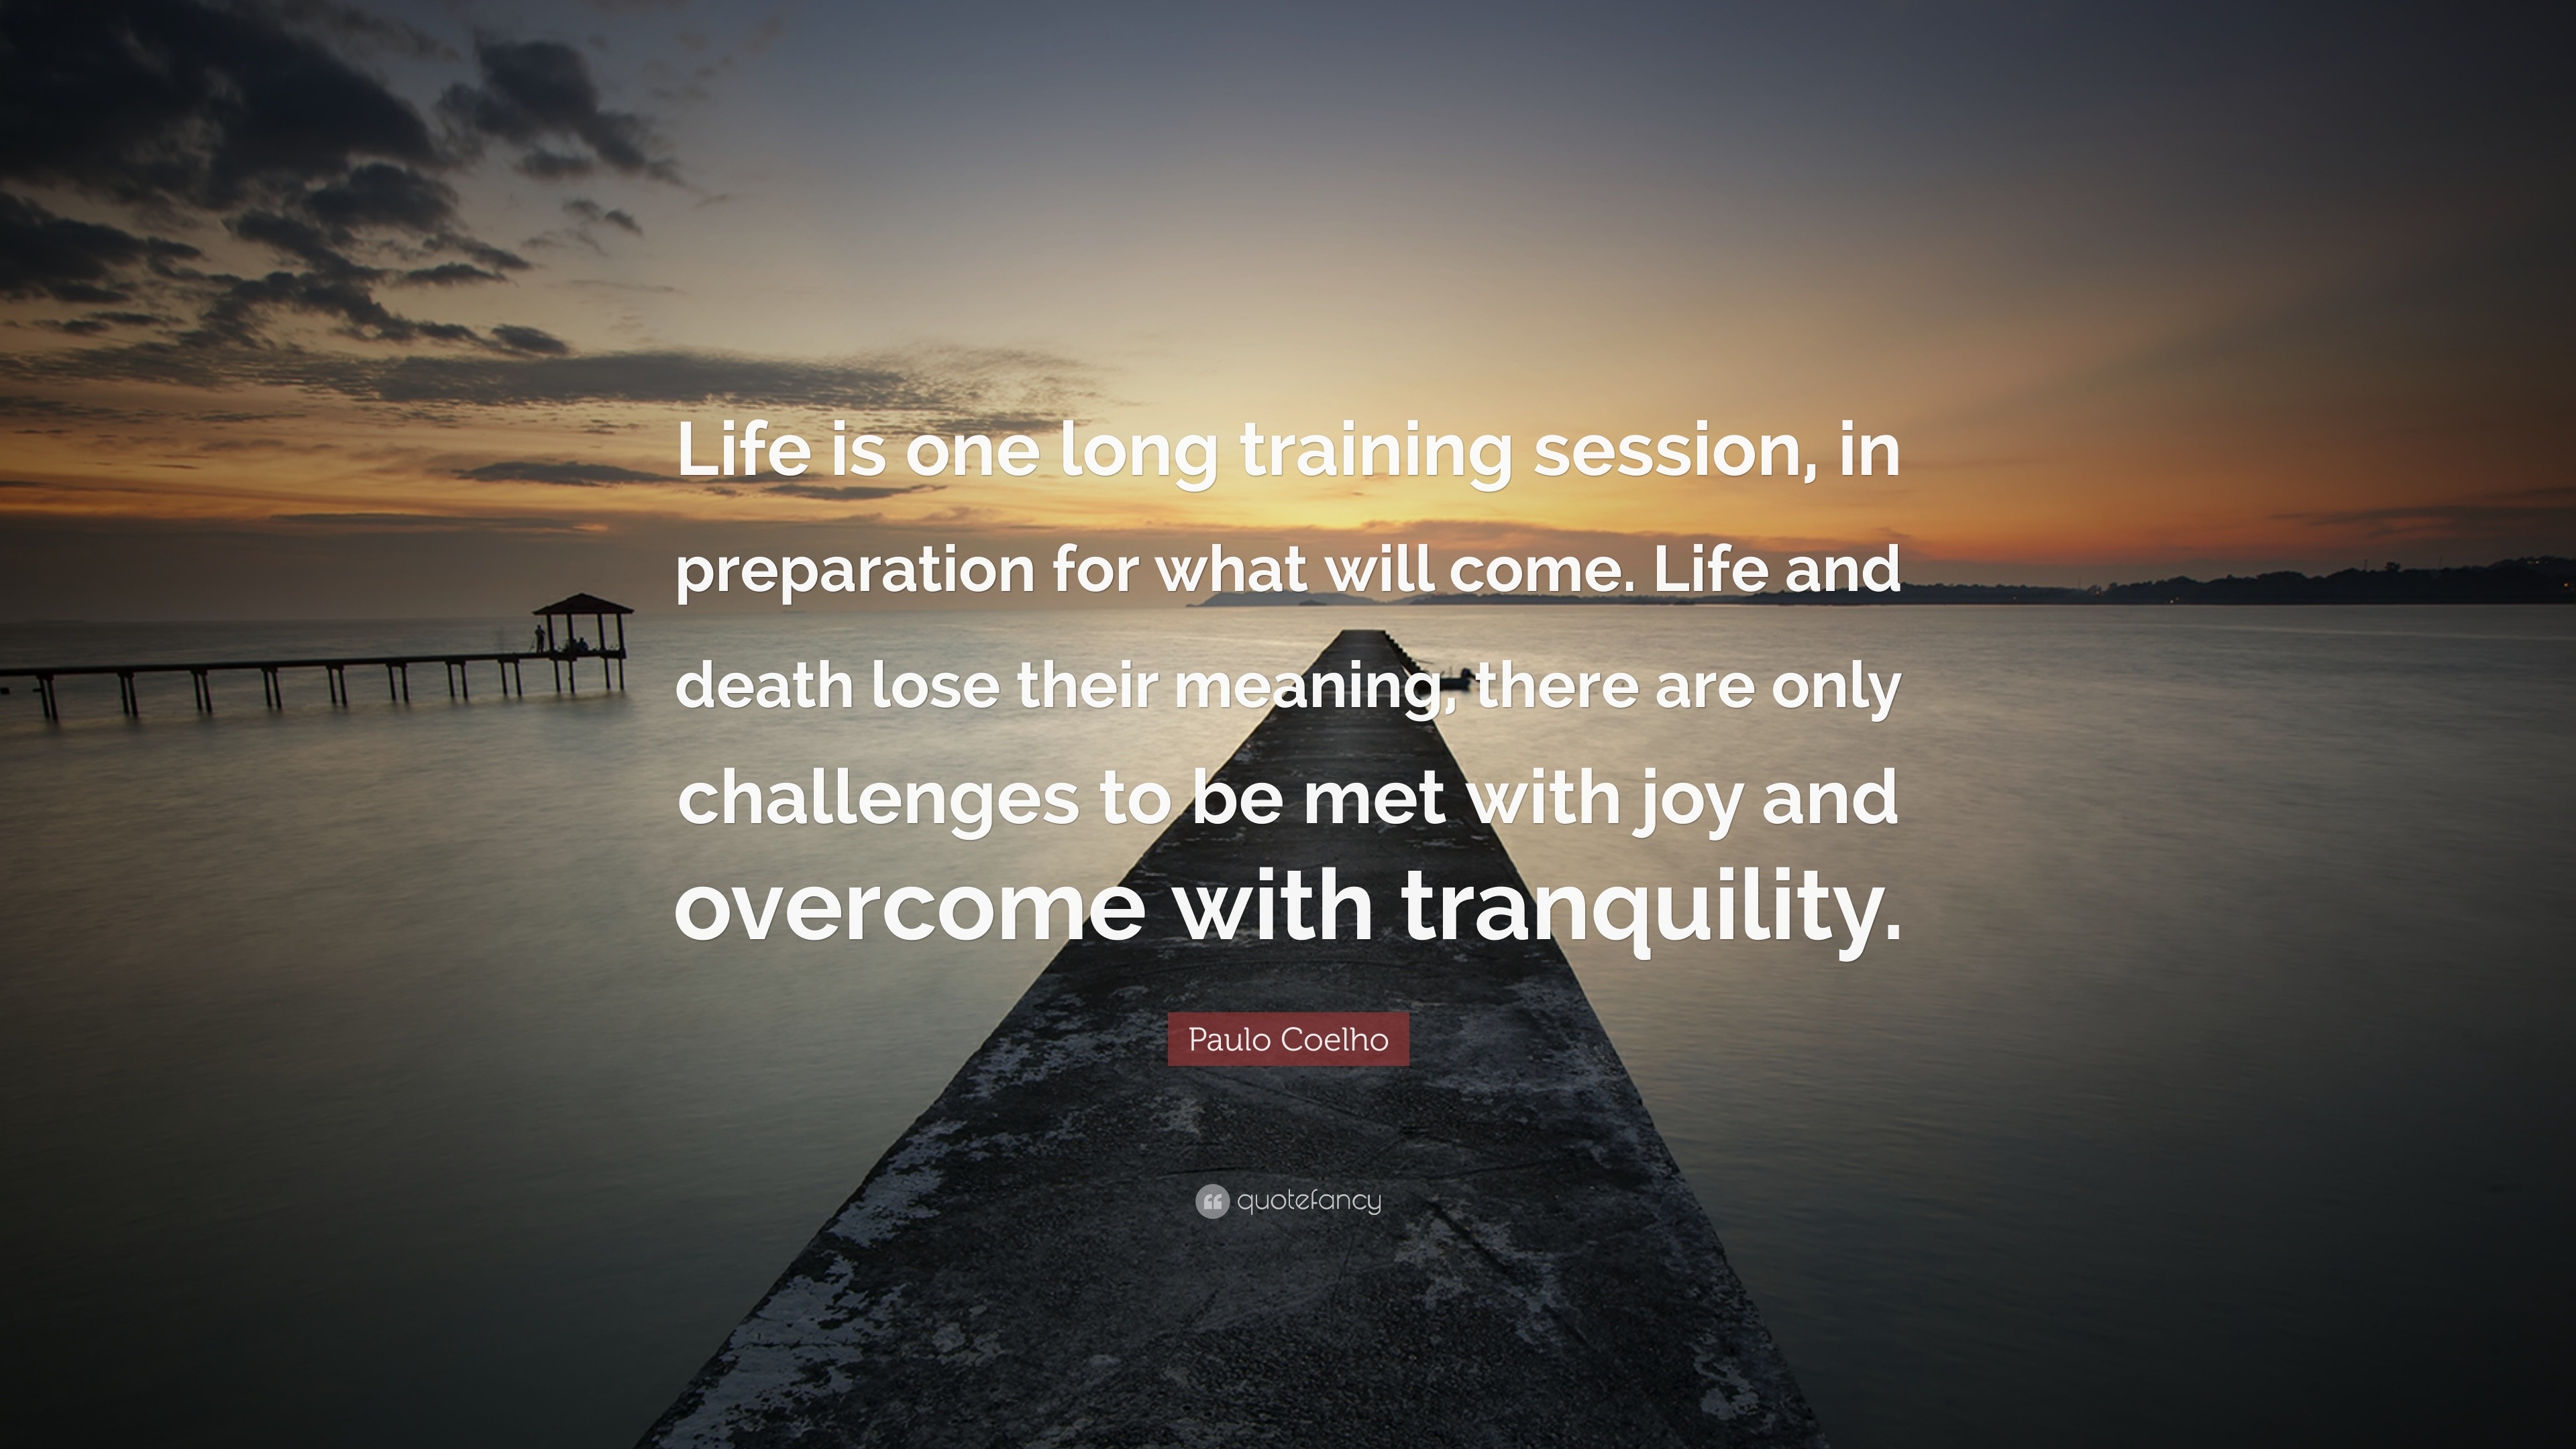 Paulo Coelho Quote “Life is one long training session in preparation for what